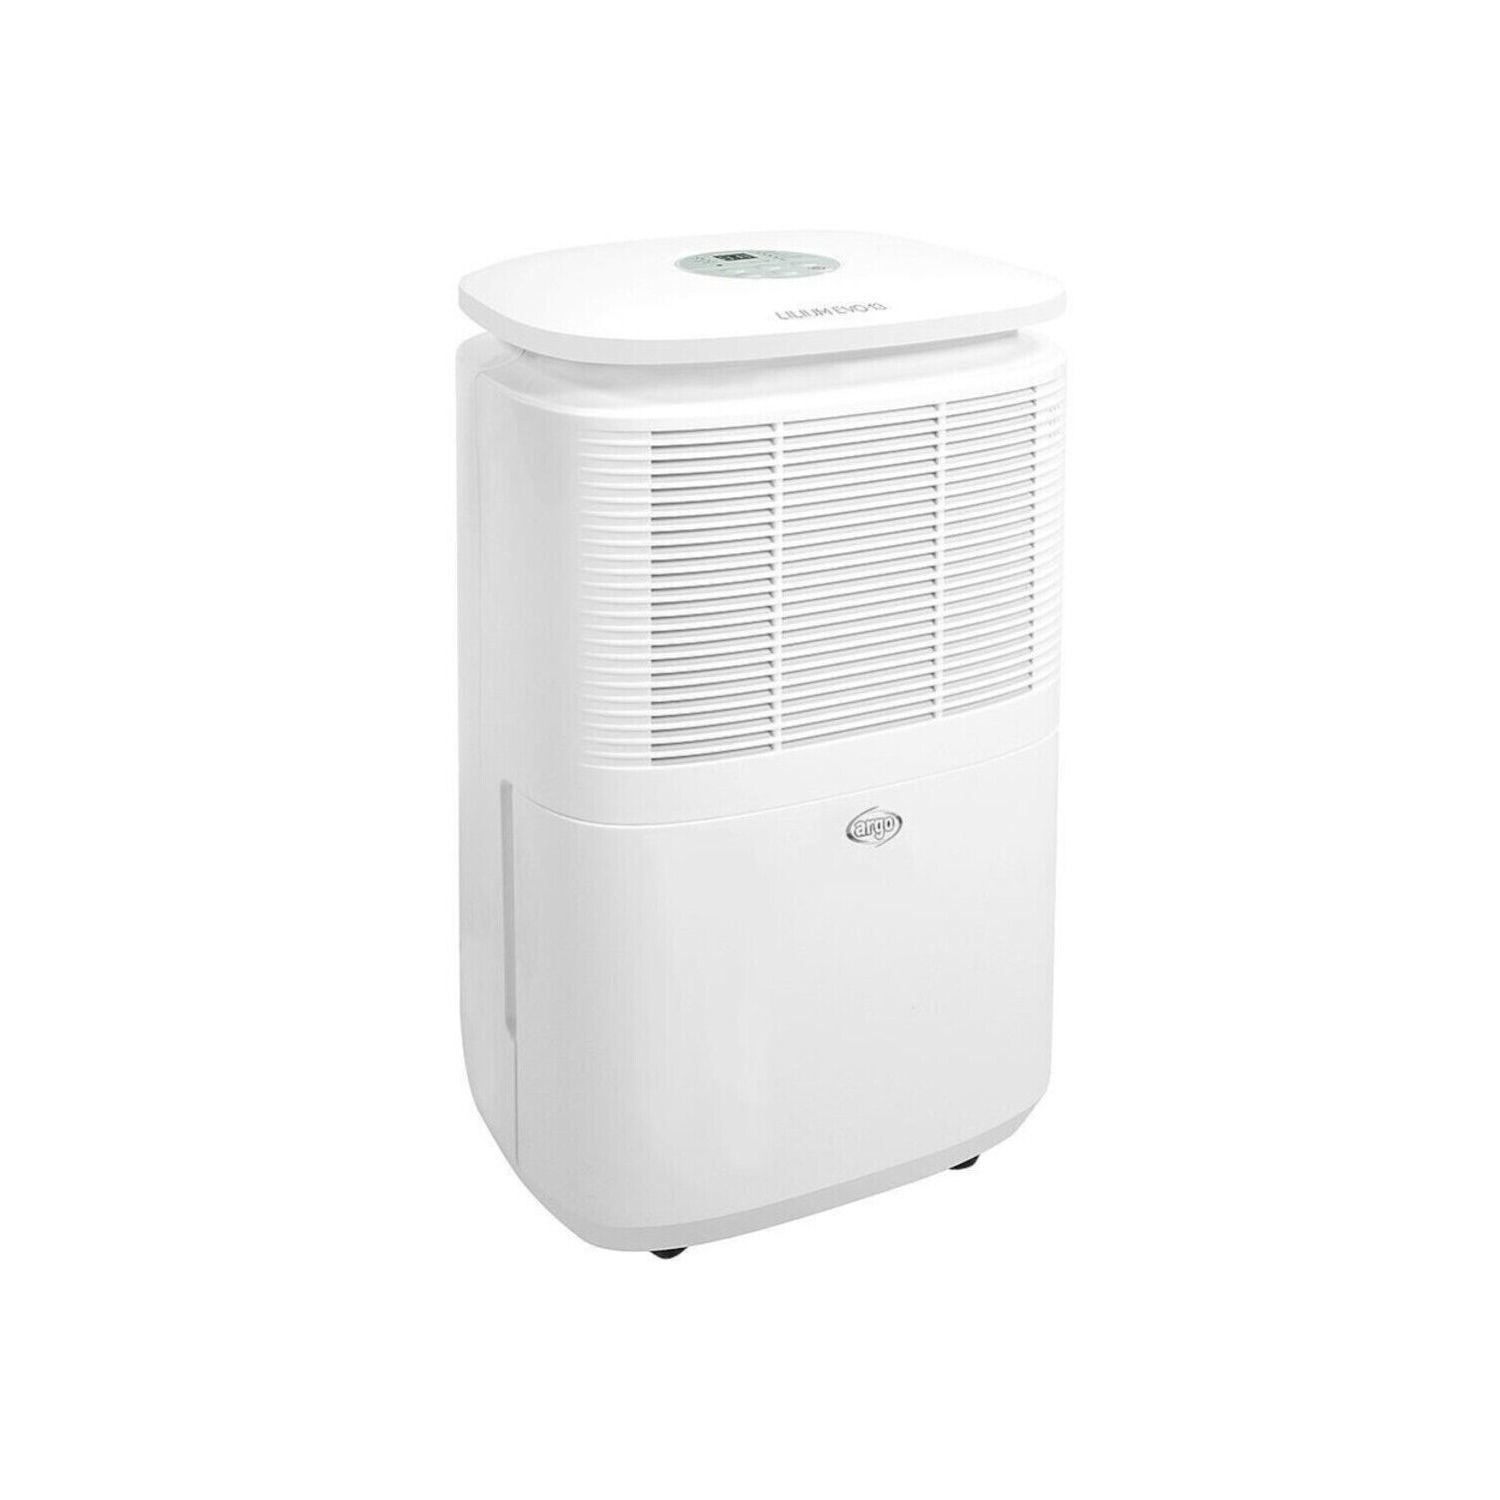 Argo 12 Litre Dehumidifier with Laundry Digital Humidistat and Anti Dust filter